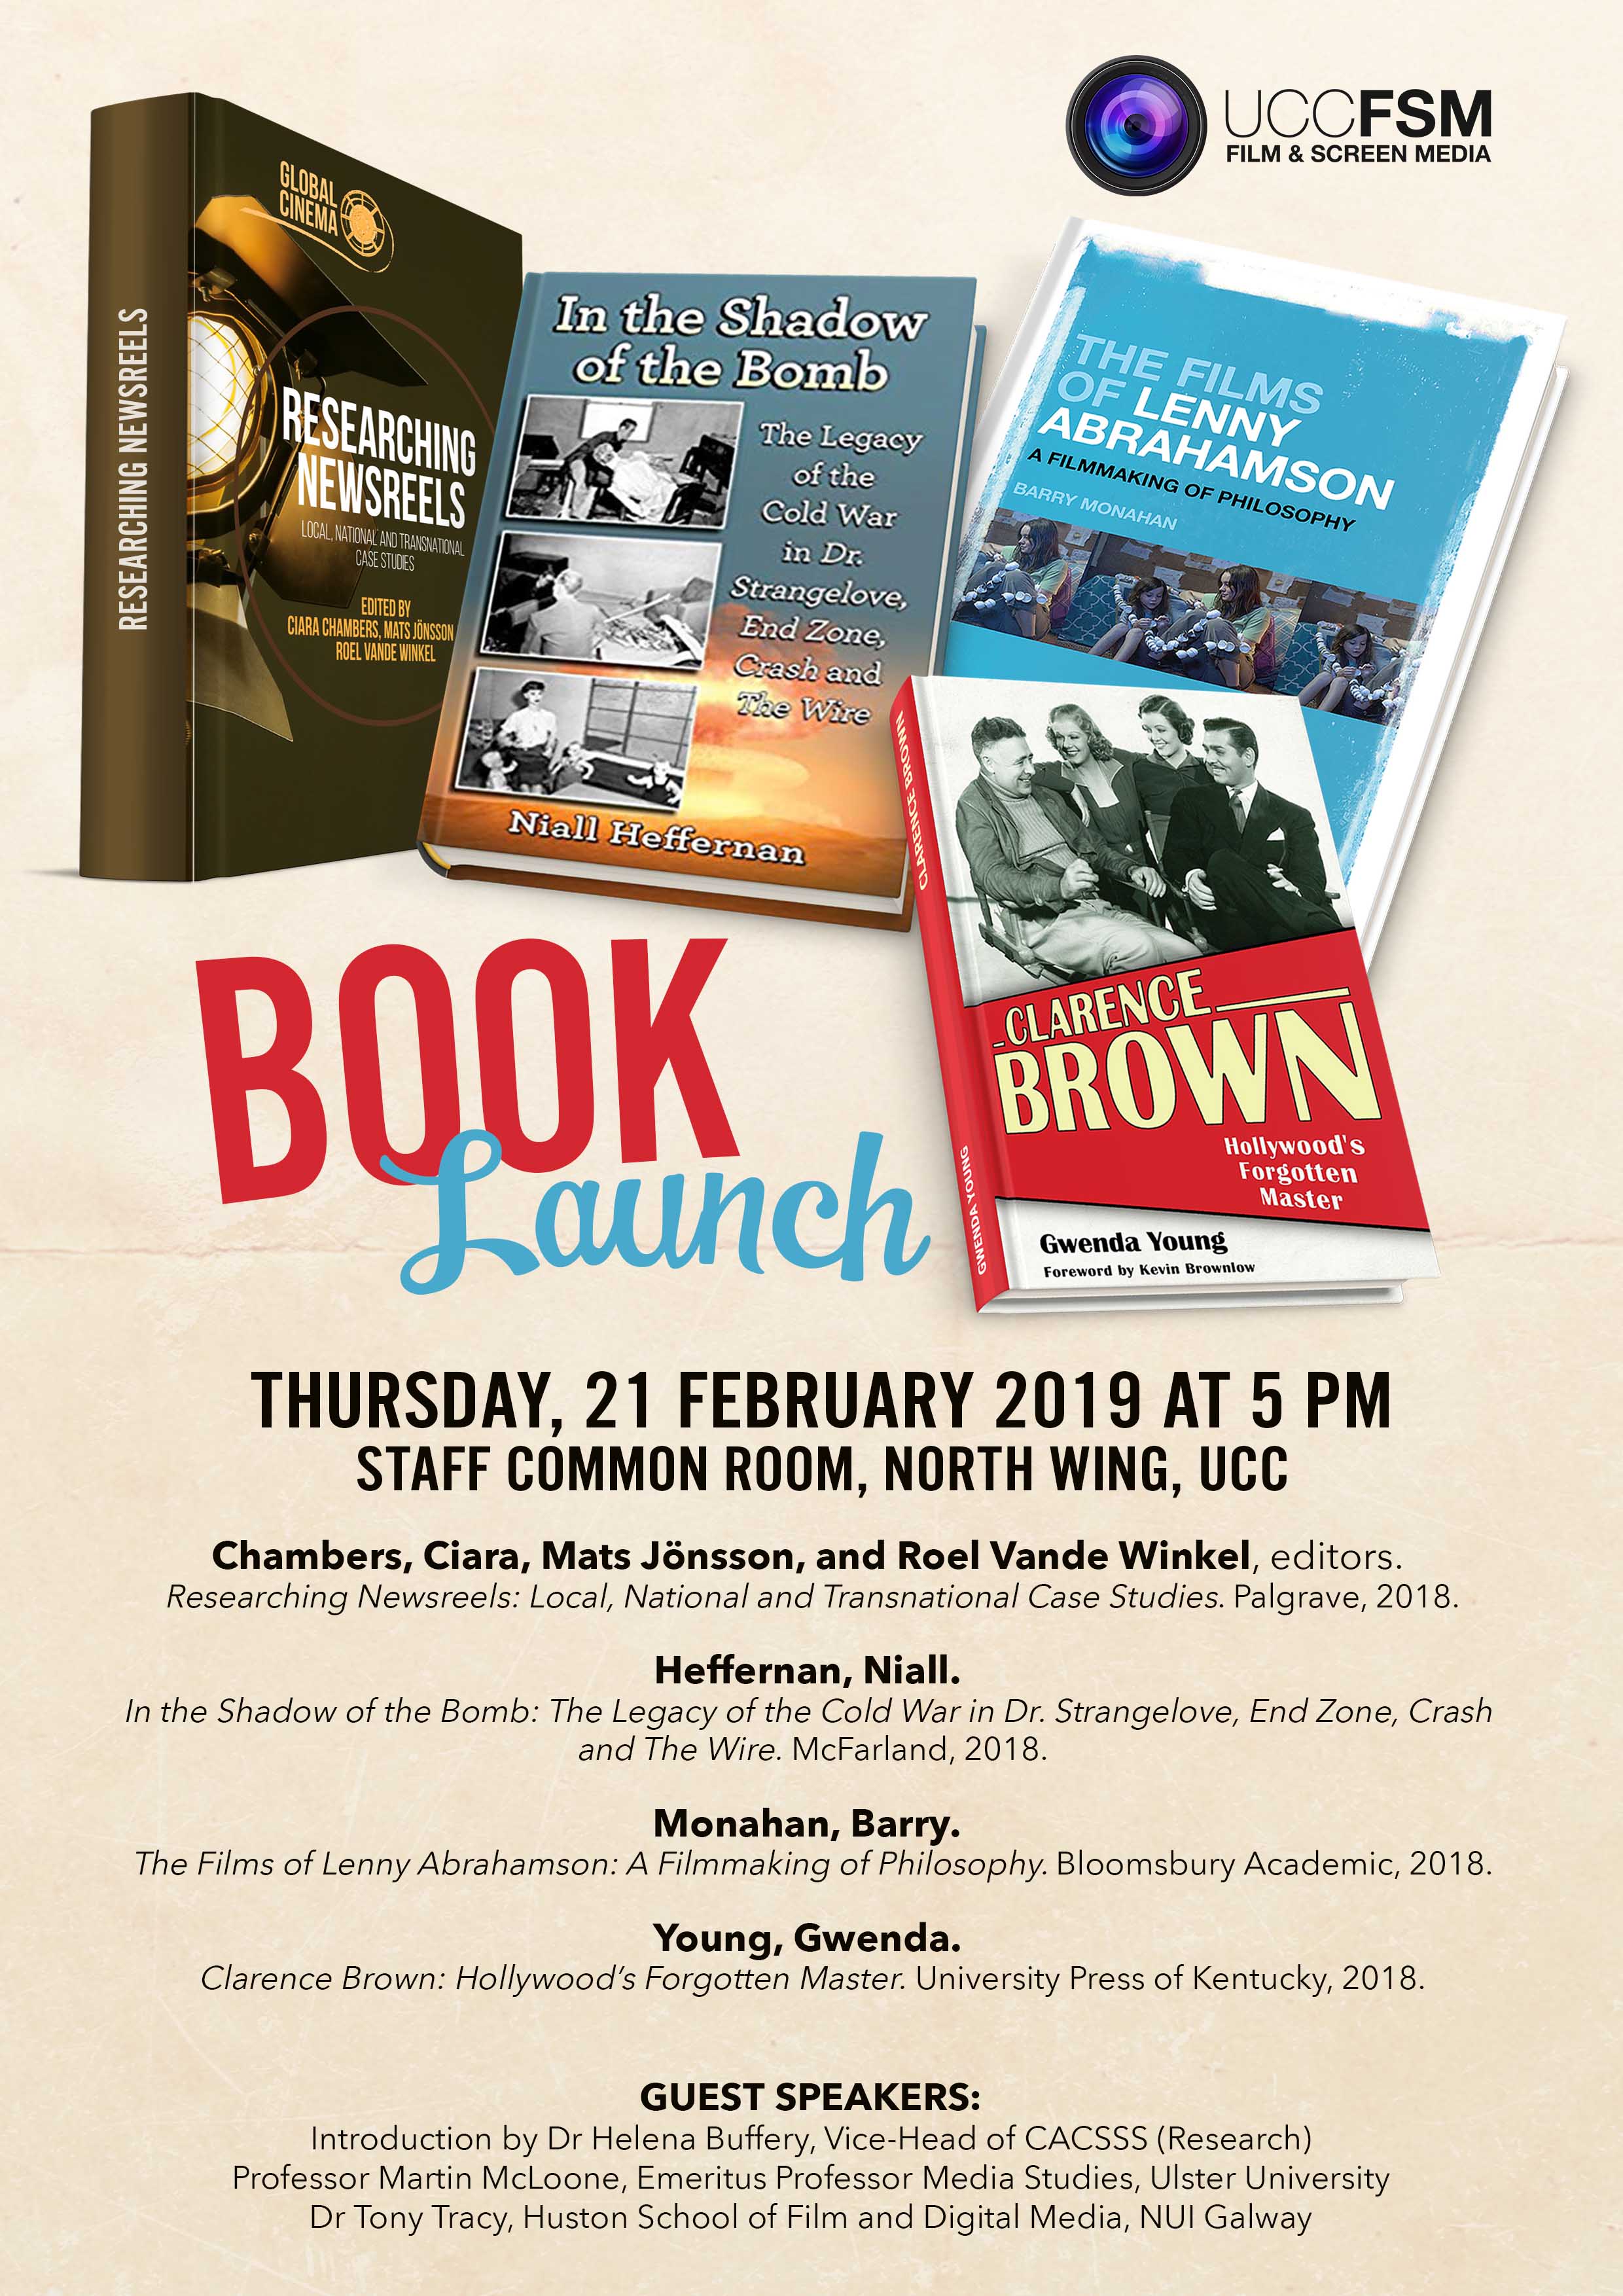 Film and Screen Media announces Book Launch Thursday 21st Feb, Staff Common Room.